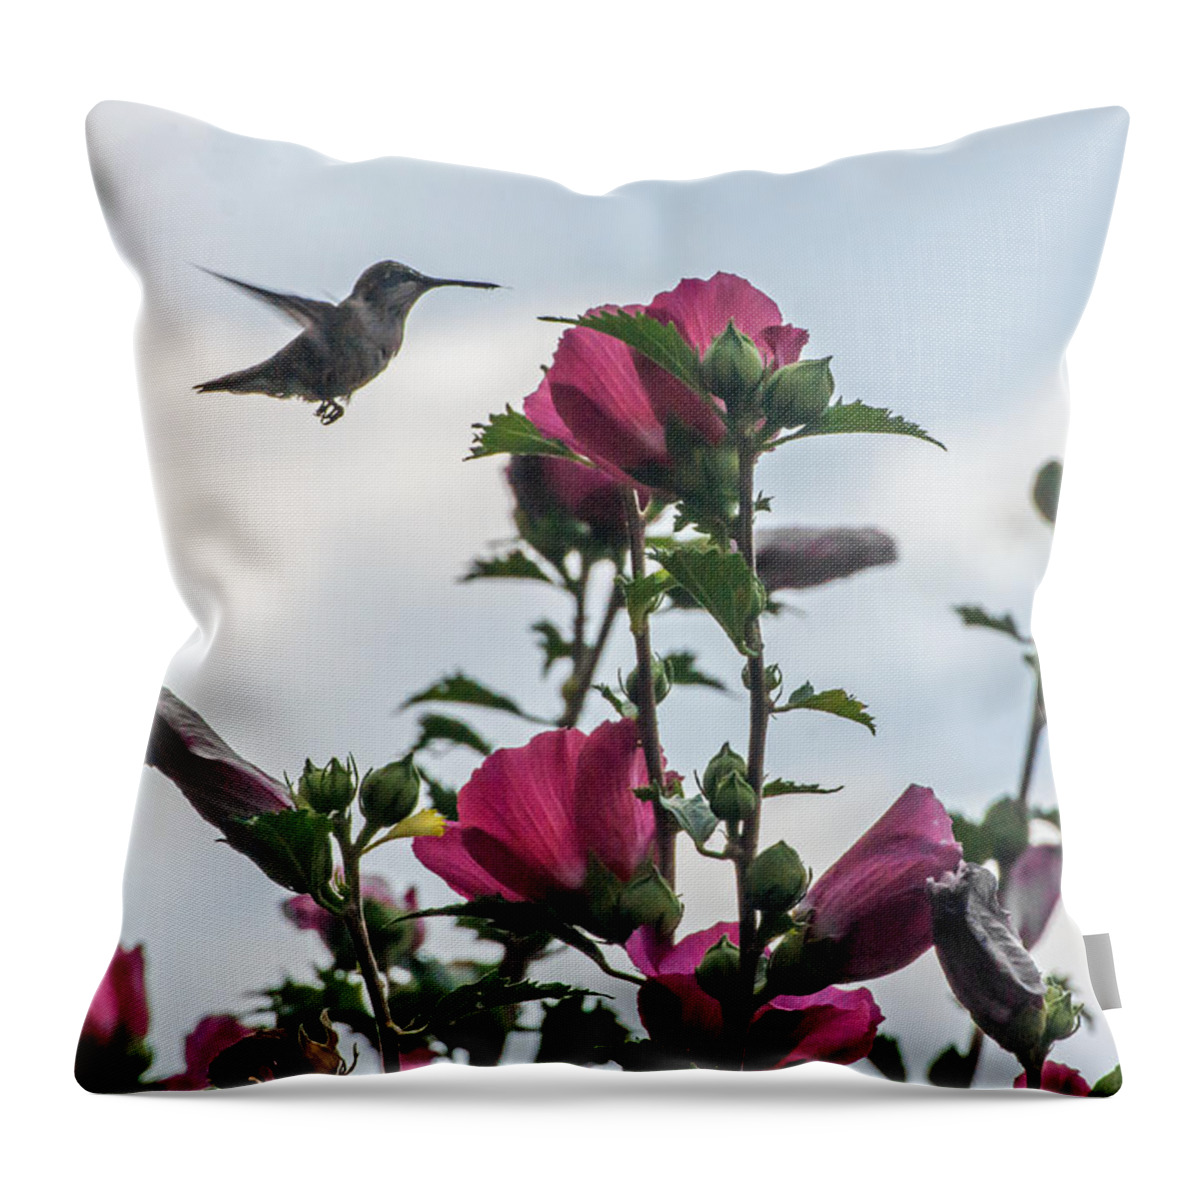 Hummingbird Throw Pillow featuring the photograph Hummingbird with Rose of Sharon by Photographic Arts And Design Studio